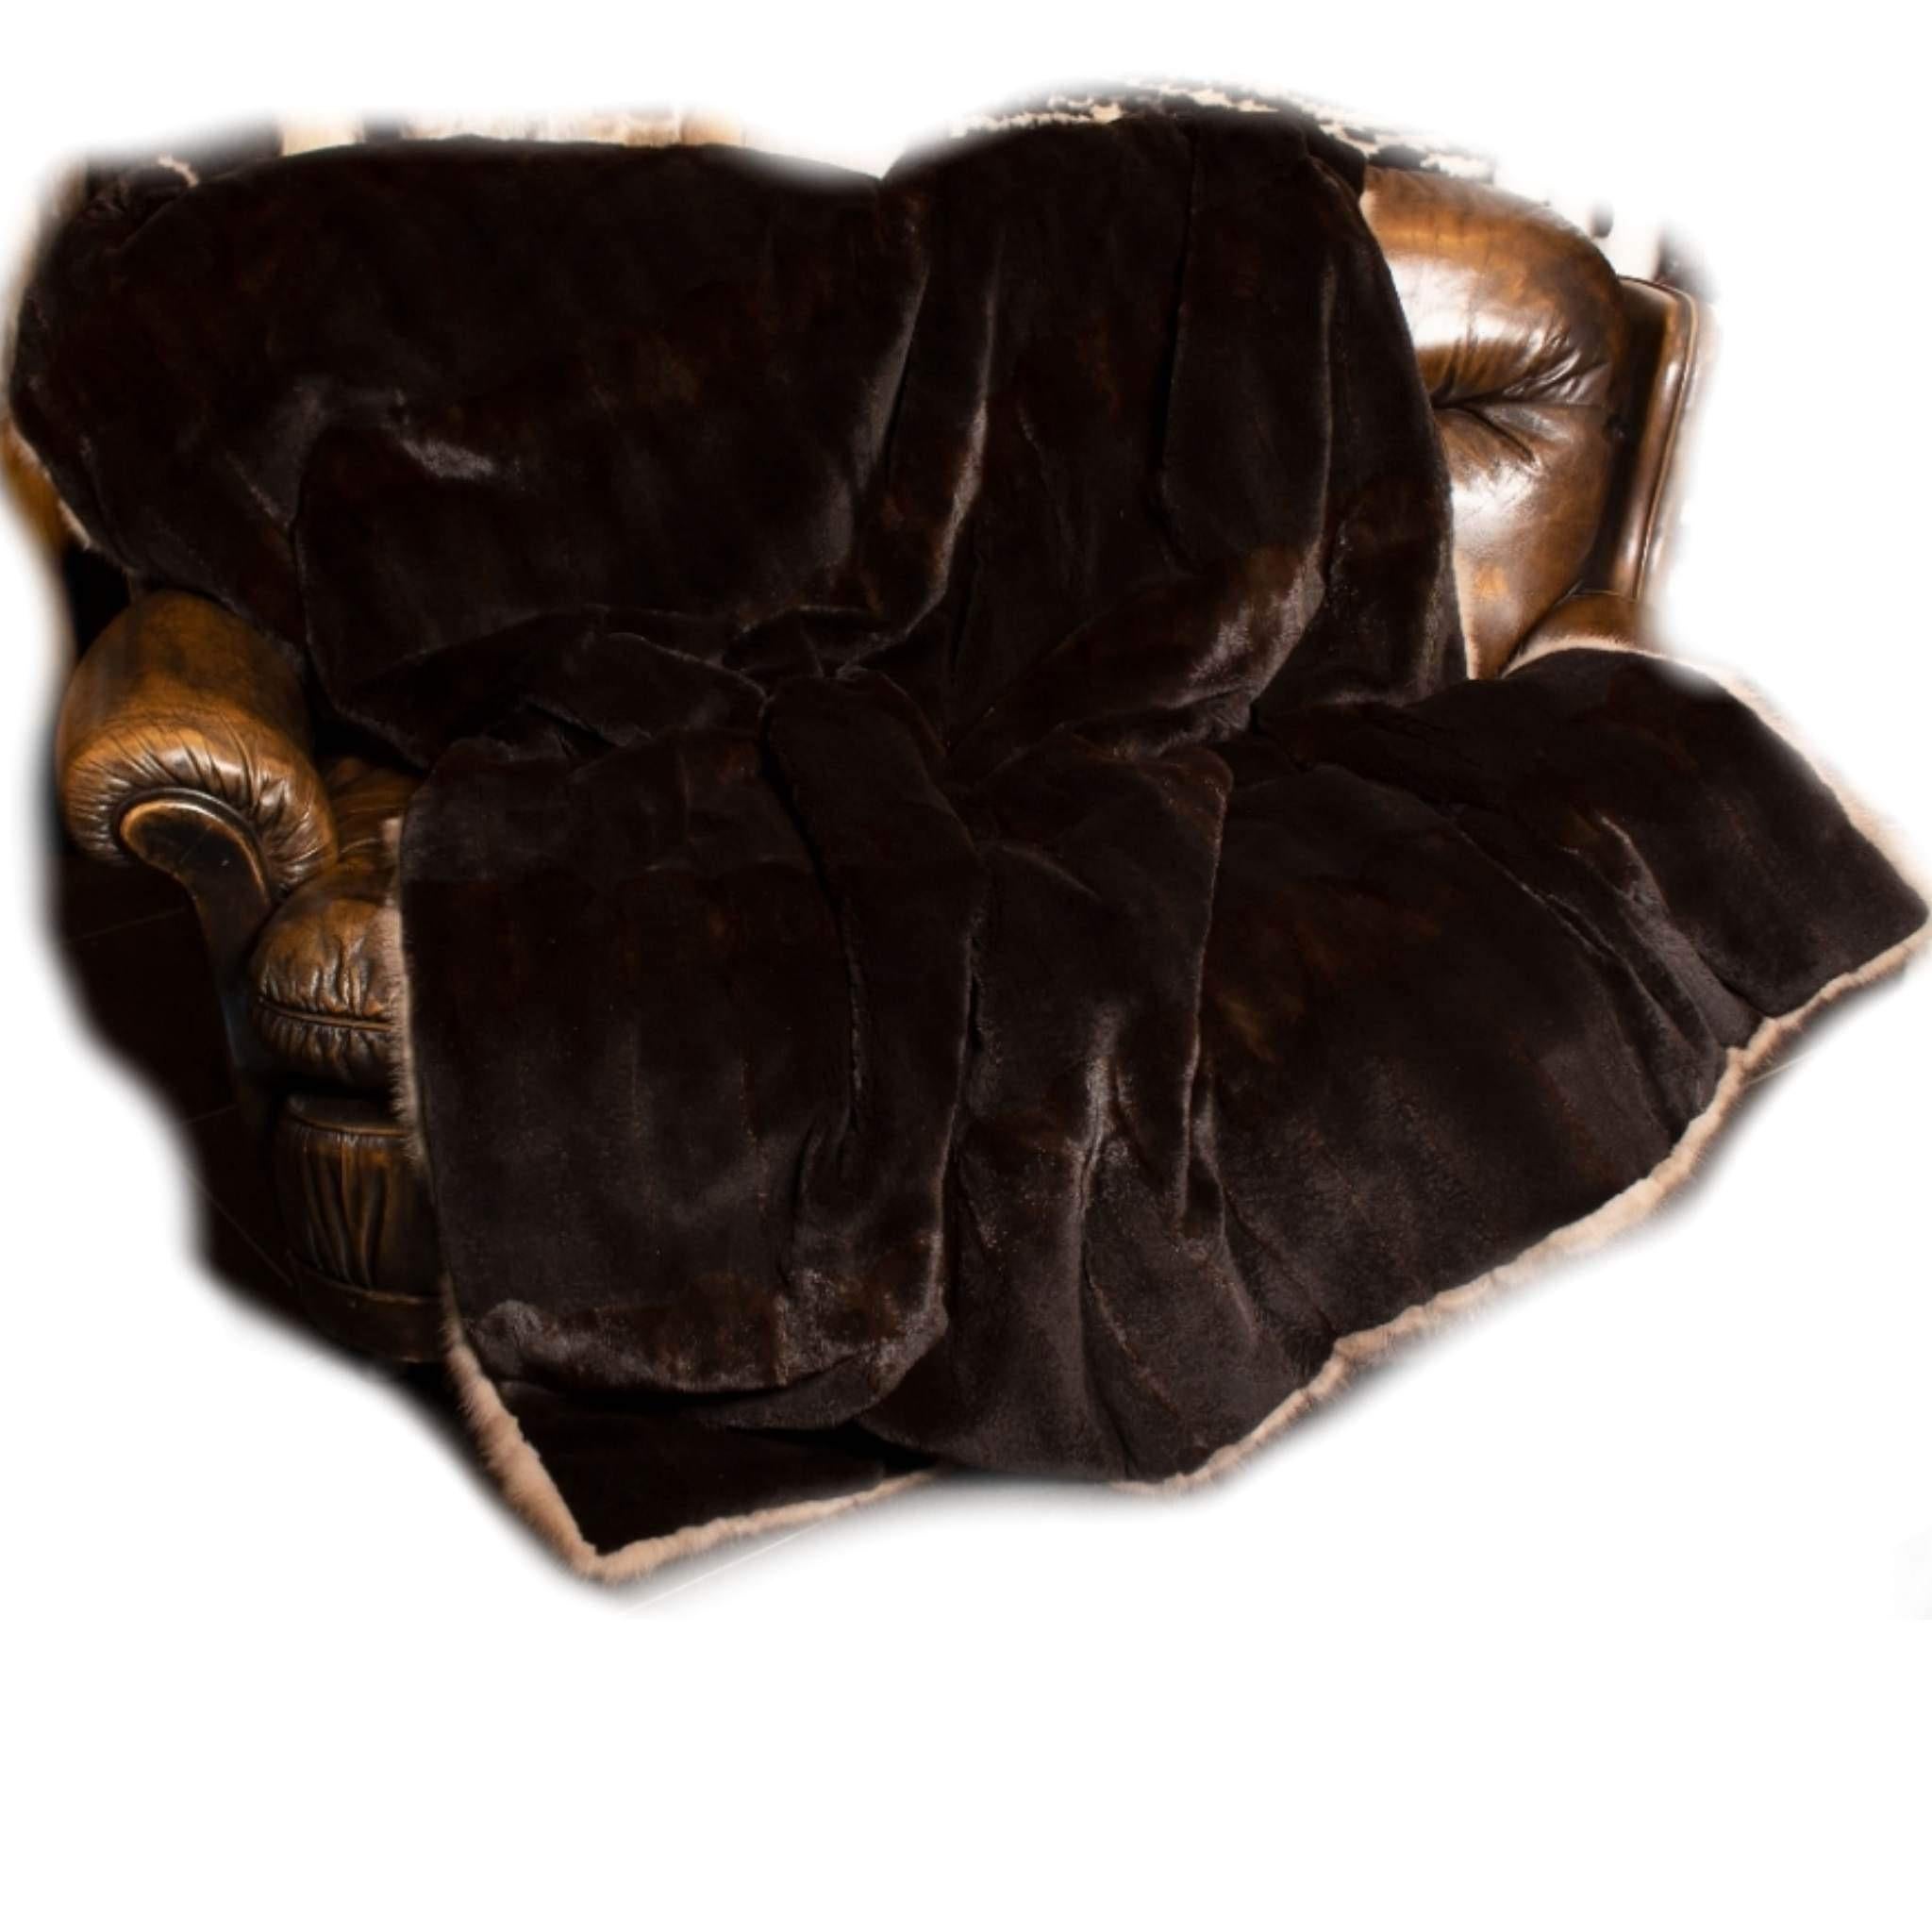 Brand New Russian Sable Fur Blanket (Queen Size 90